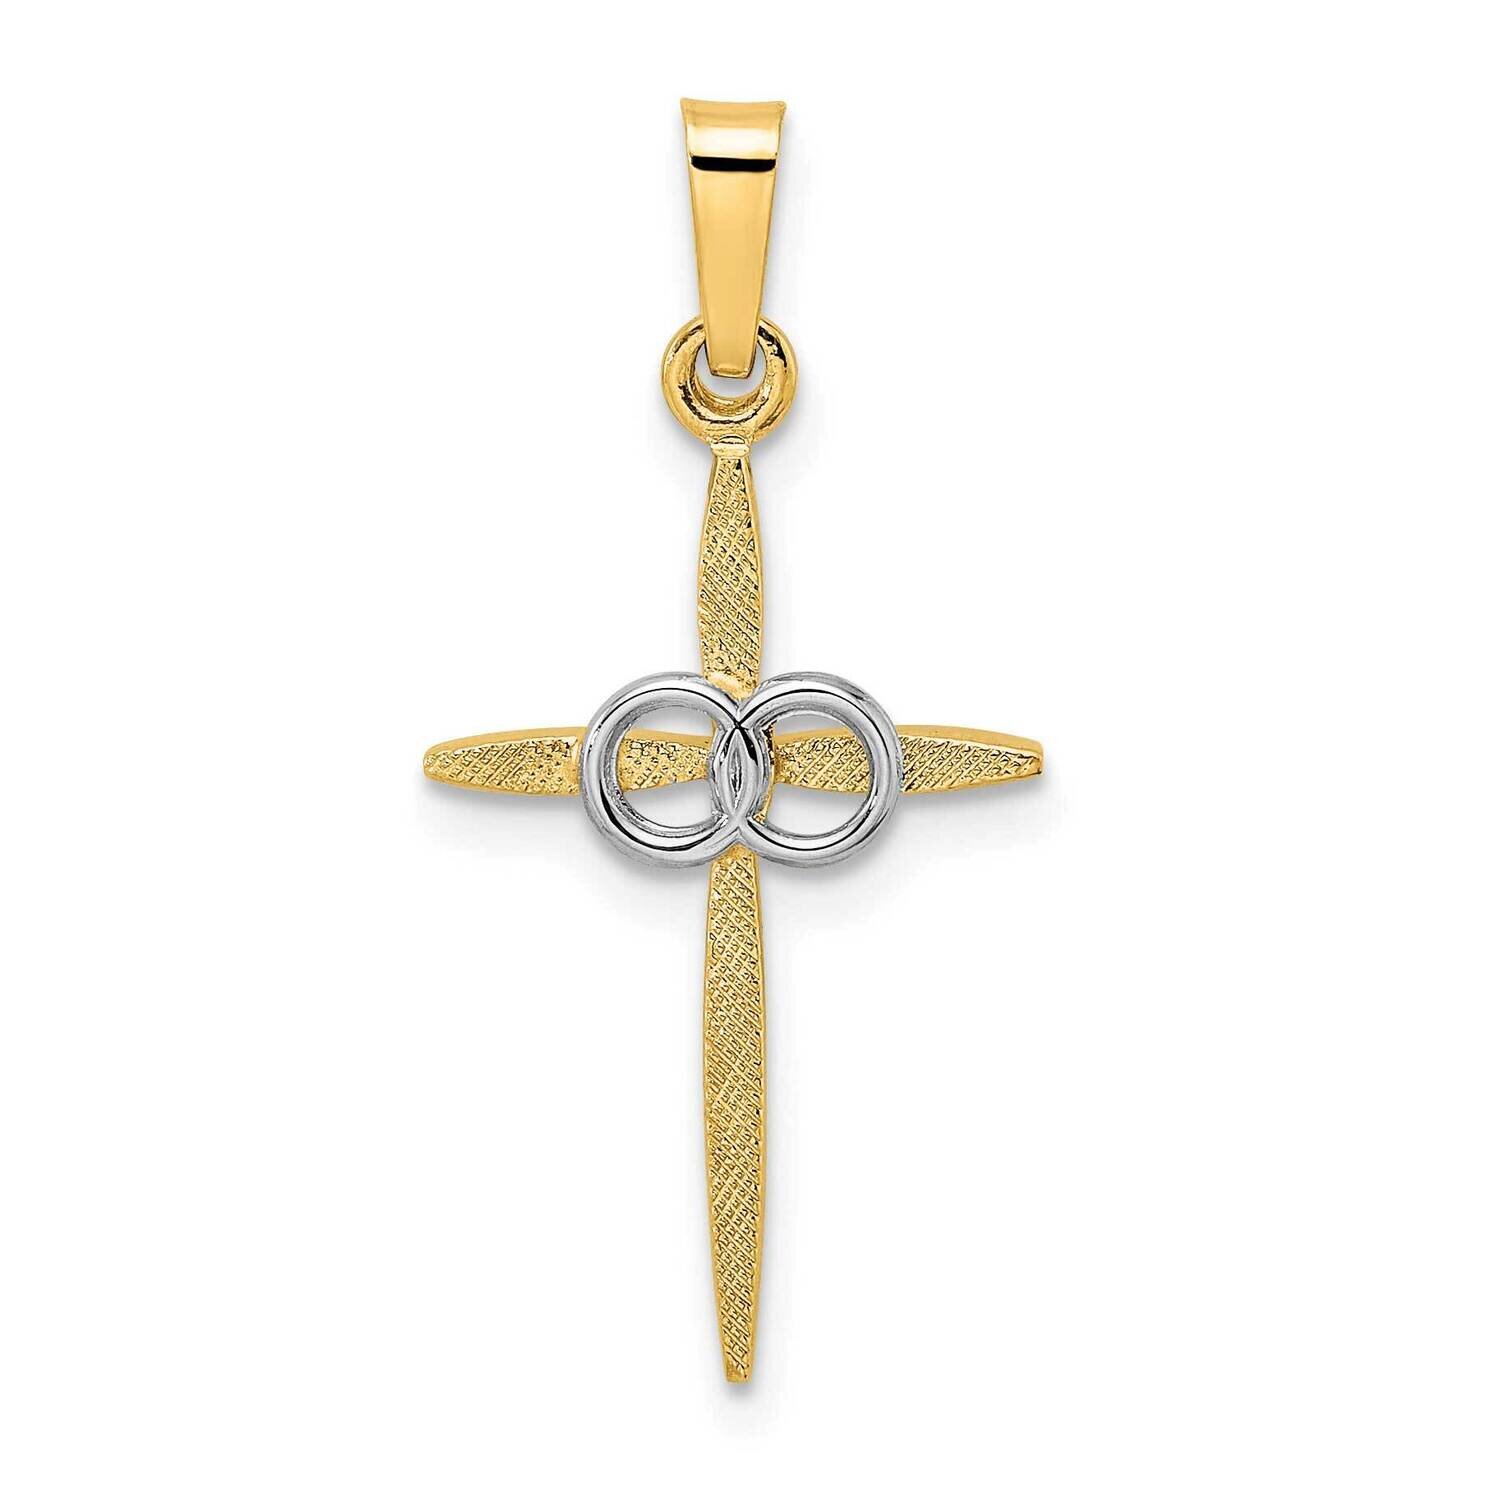 Satin Solid Double Ring Cross Pendant 14k Two-Tone Gold Polished XR2004